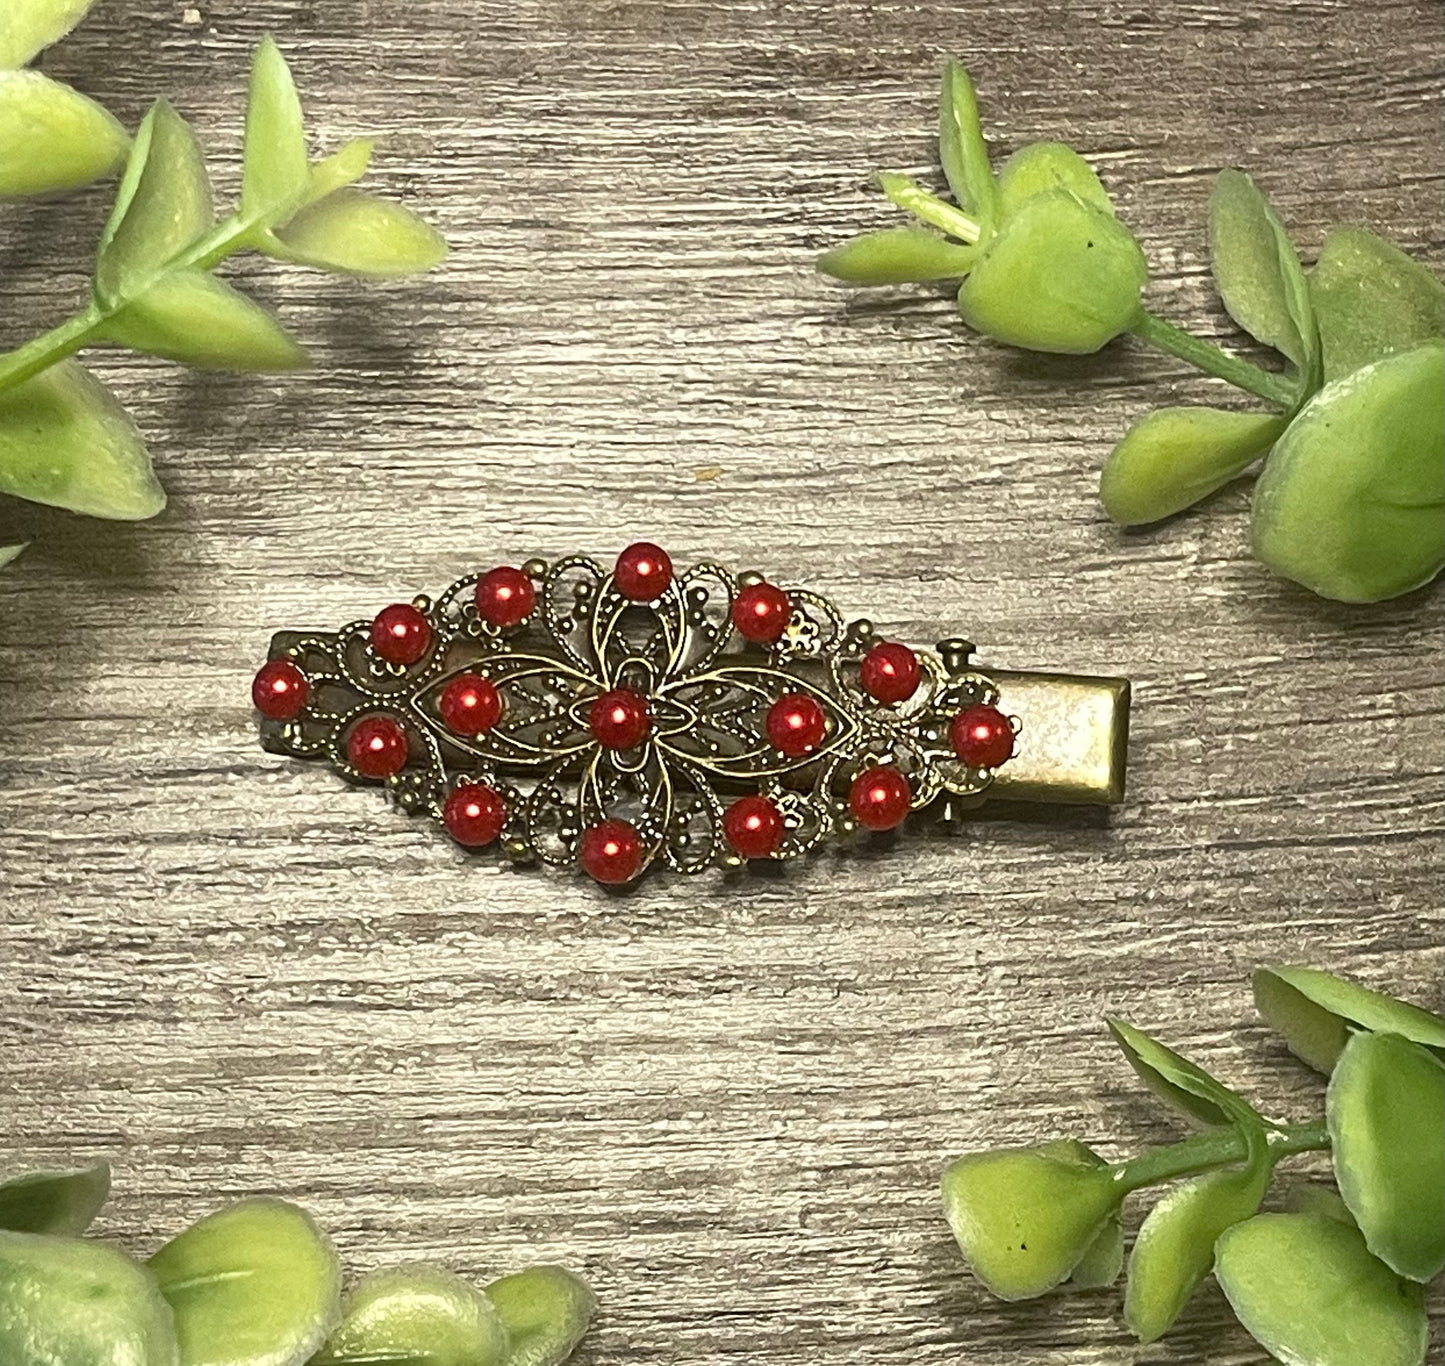 Red faux Pearl antique style hair alligator clip approximately 2,5” long Handmade hair accessory bridal wedding